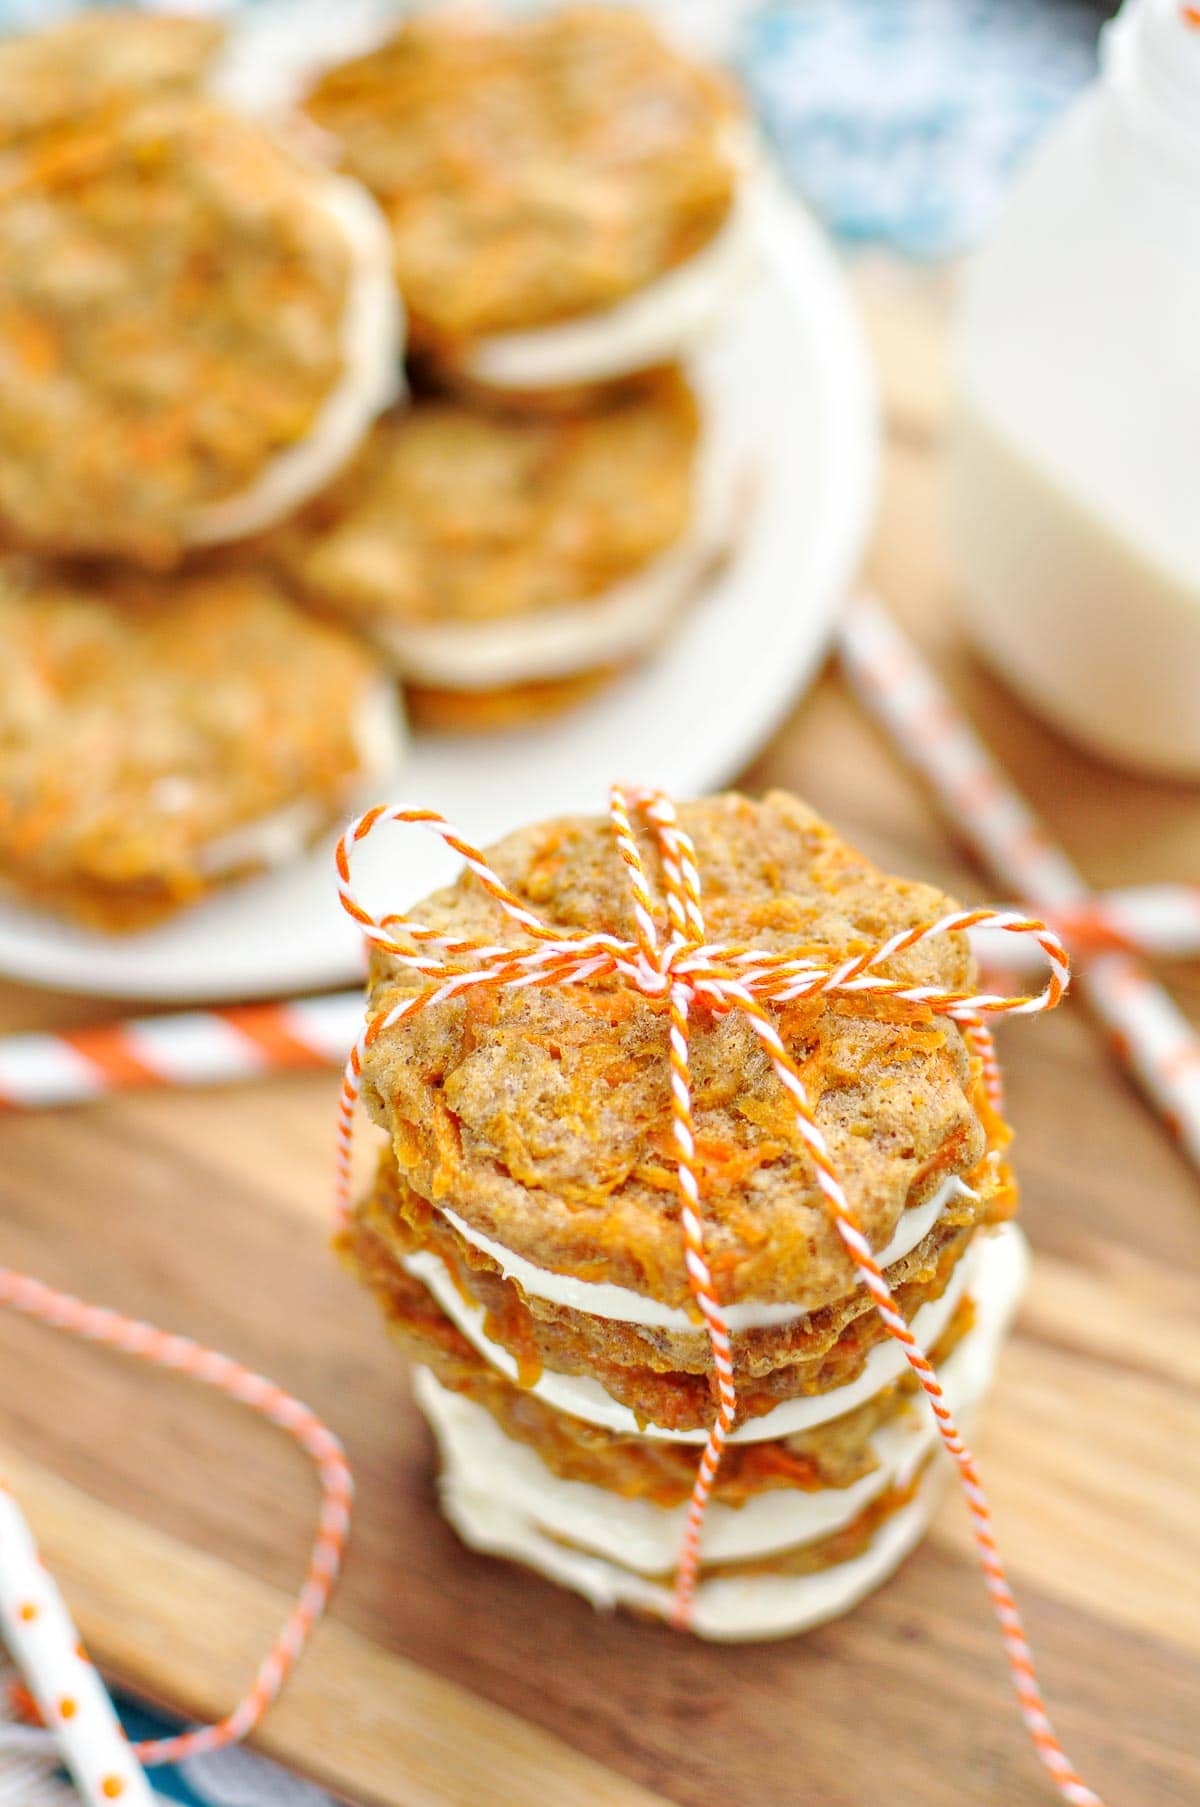 Carrot Cake Cookies on plate and tied with string.